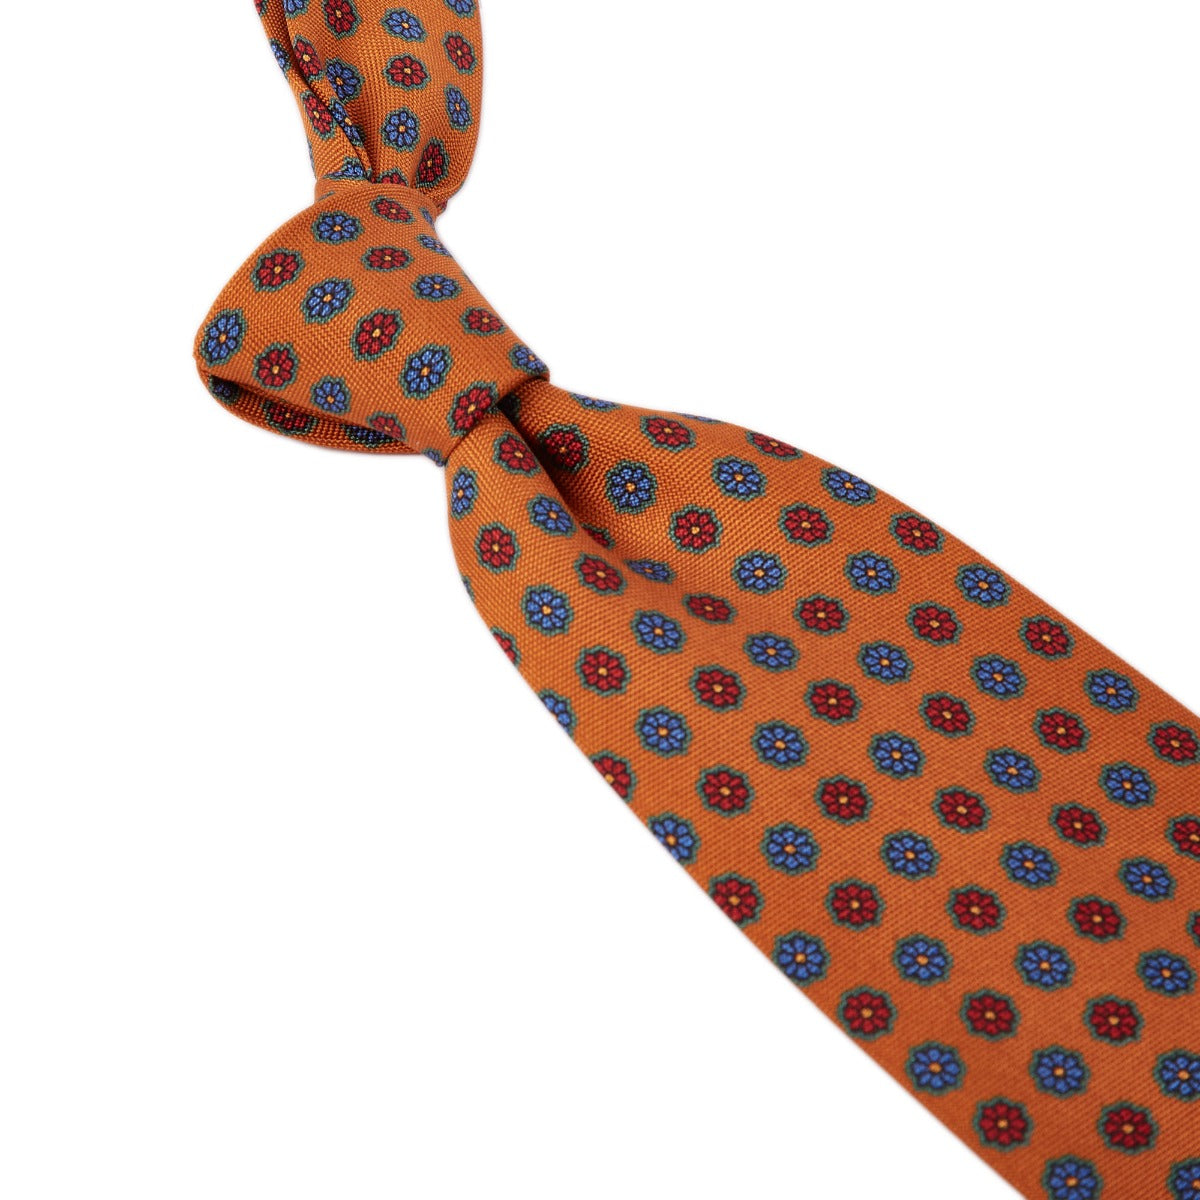 A Sovereign Grade Chestnut Floral 25 oz Hopsack Silk Tie by KirbyAllison.com with premium linings.